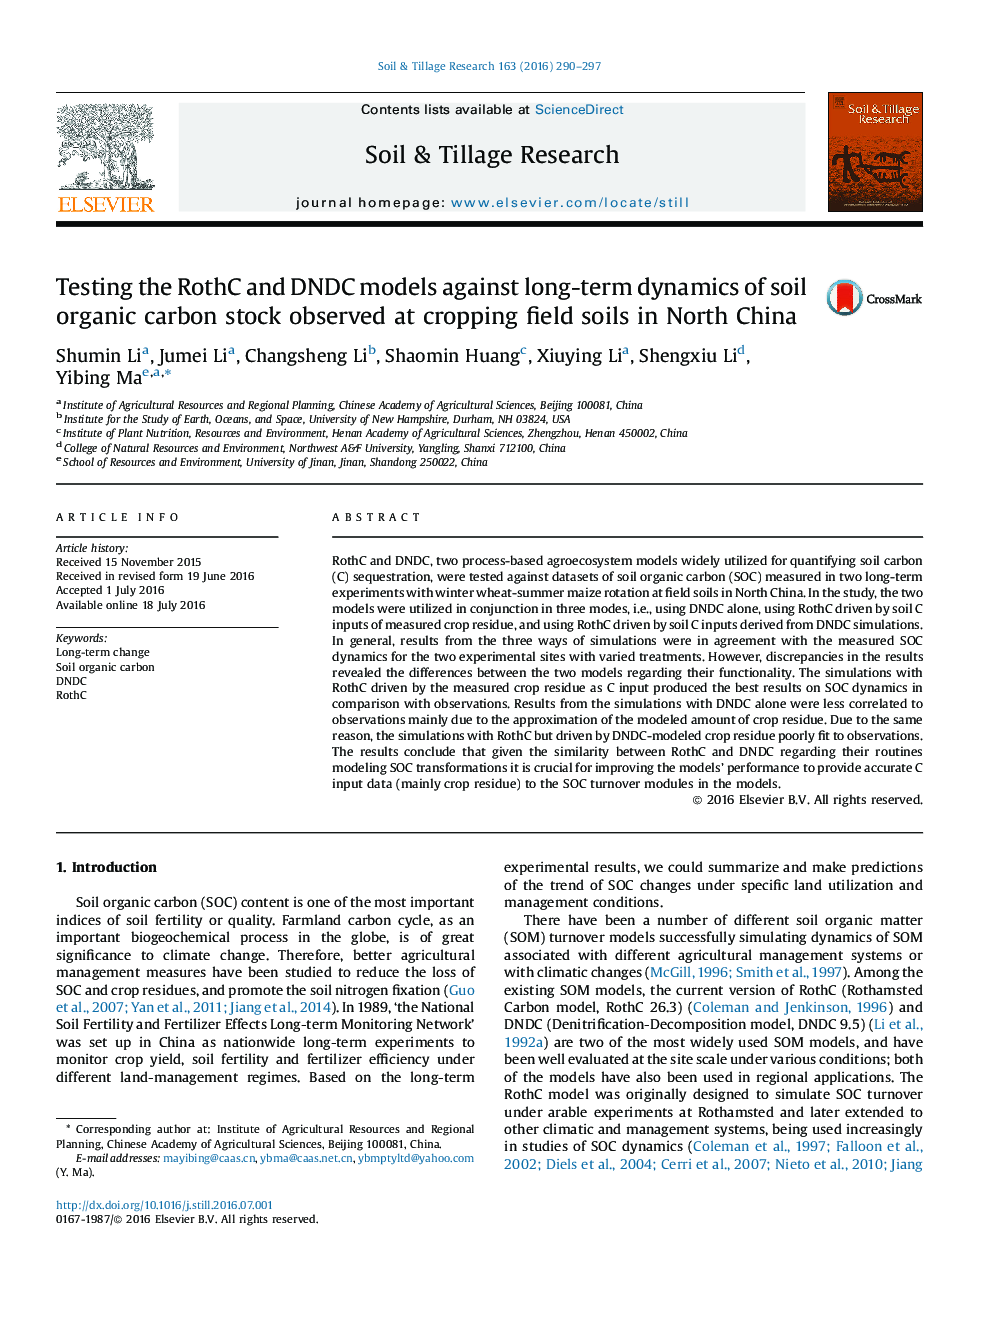 Testing the RothC and DNDC models against long-term dynamics of soil organic carbon stock observed at cropping field soils in North China